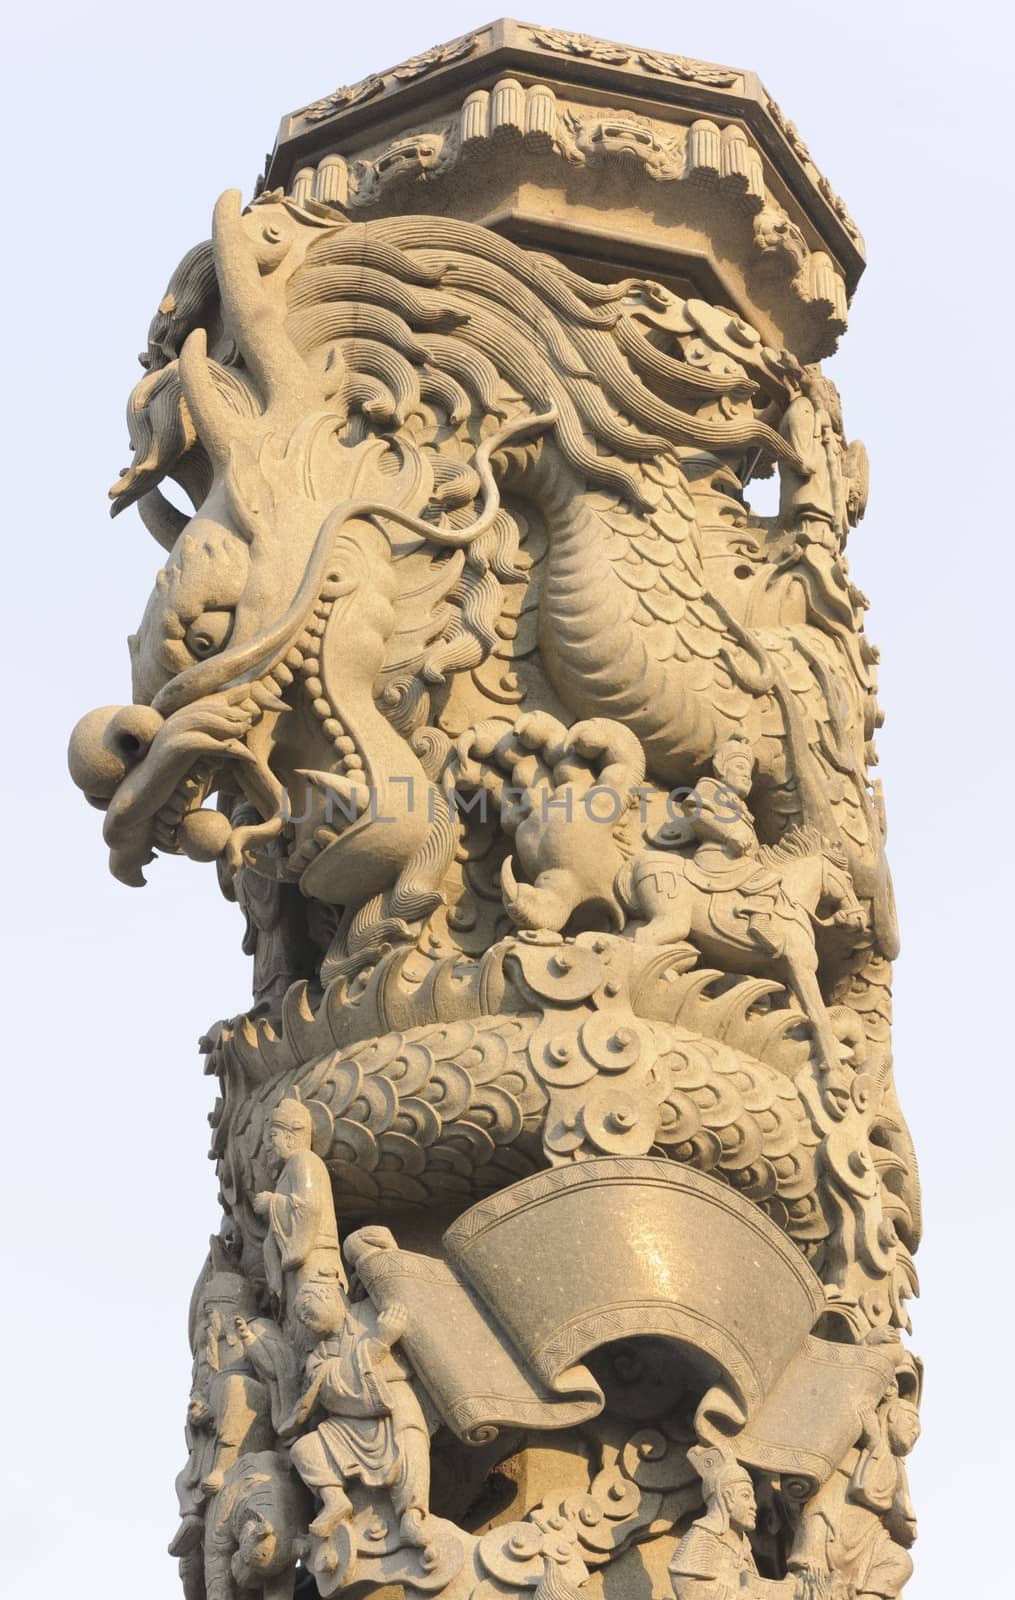 Stone dragon carving pillar in Chinese temple.